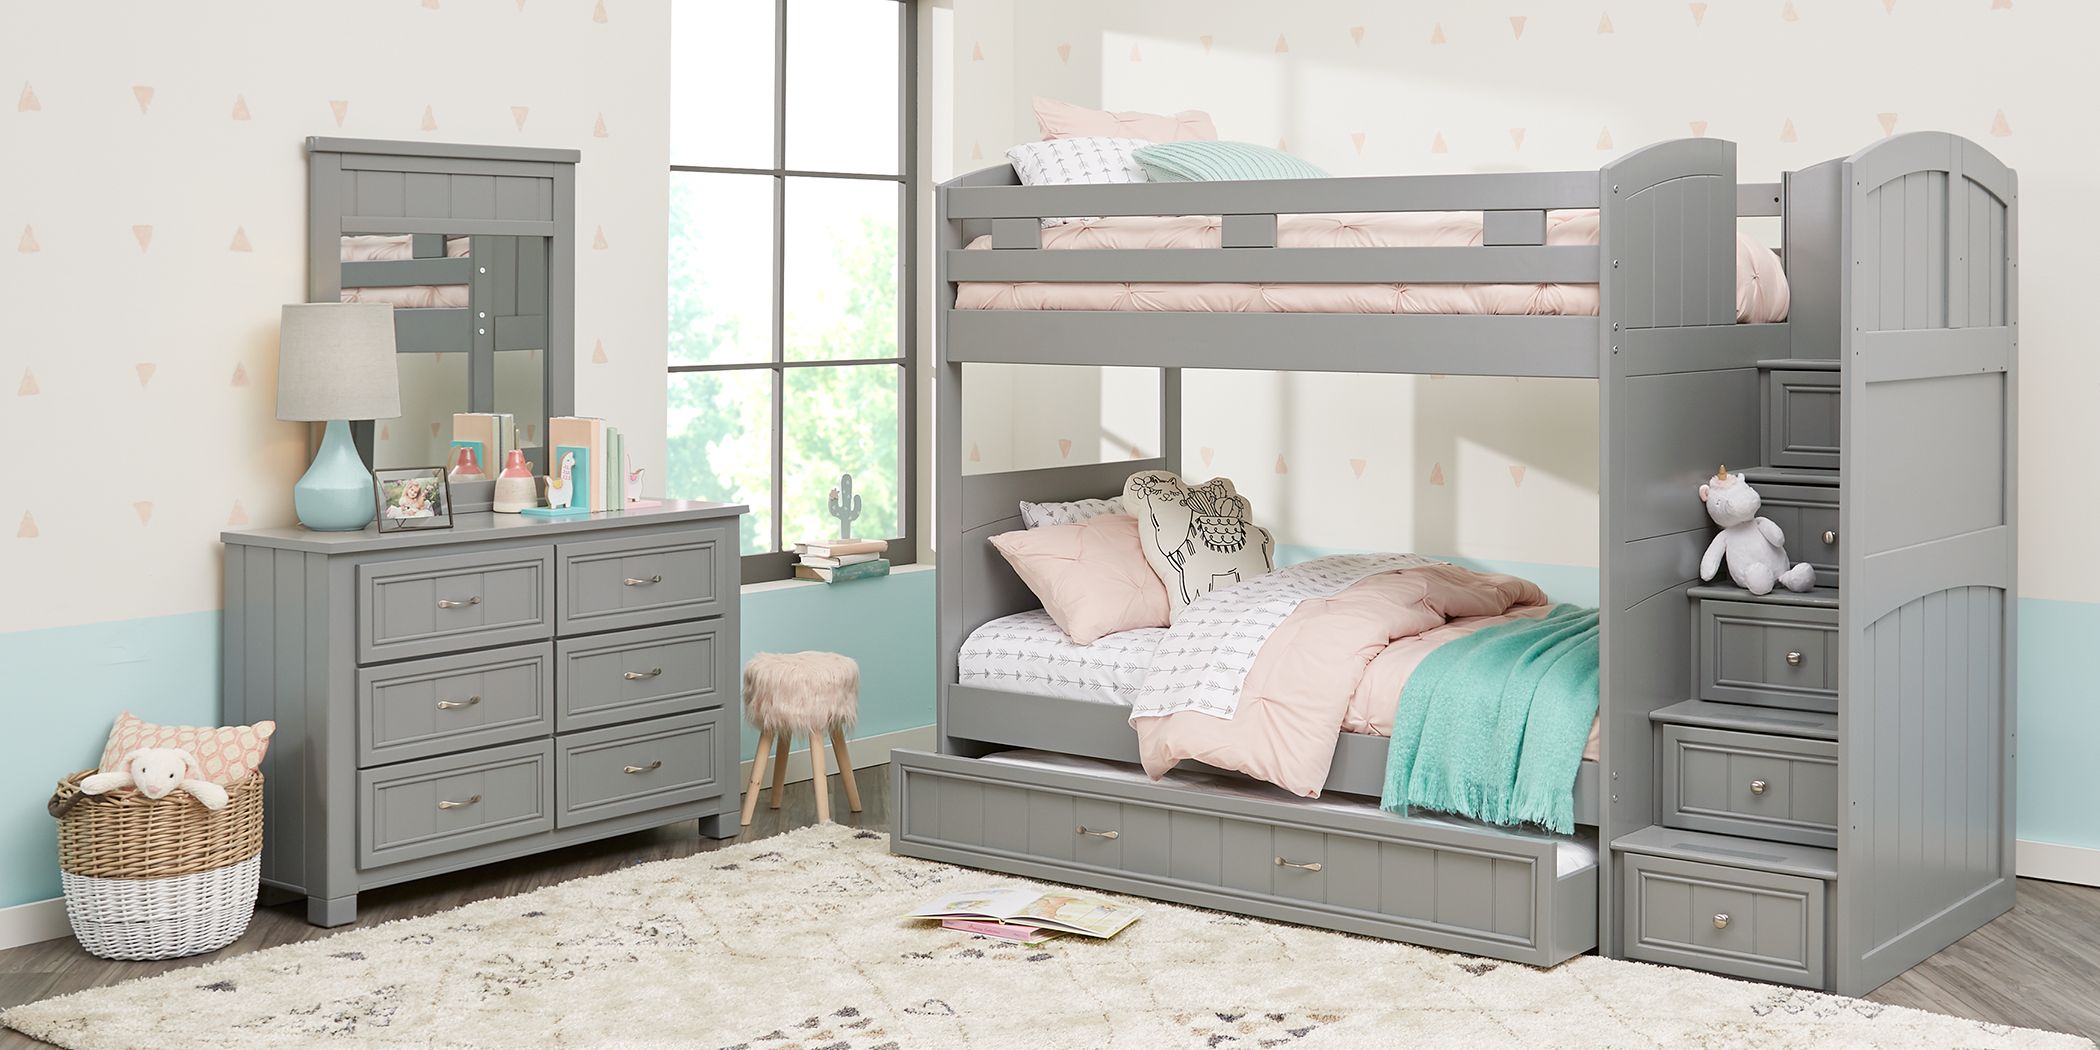 furniture stores that sell bunk beds